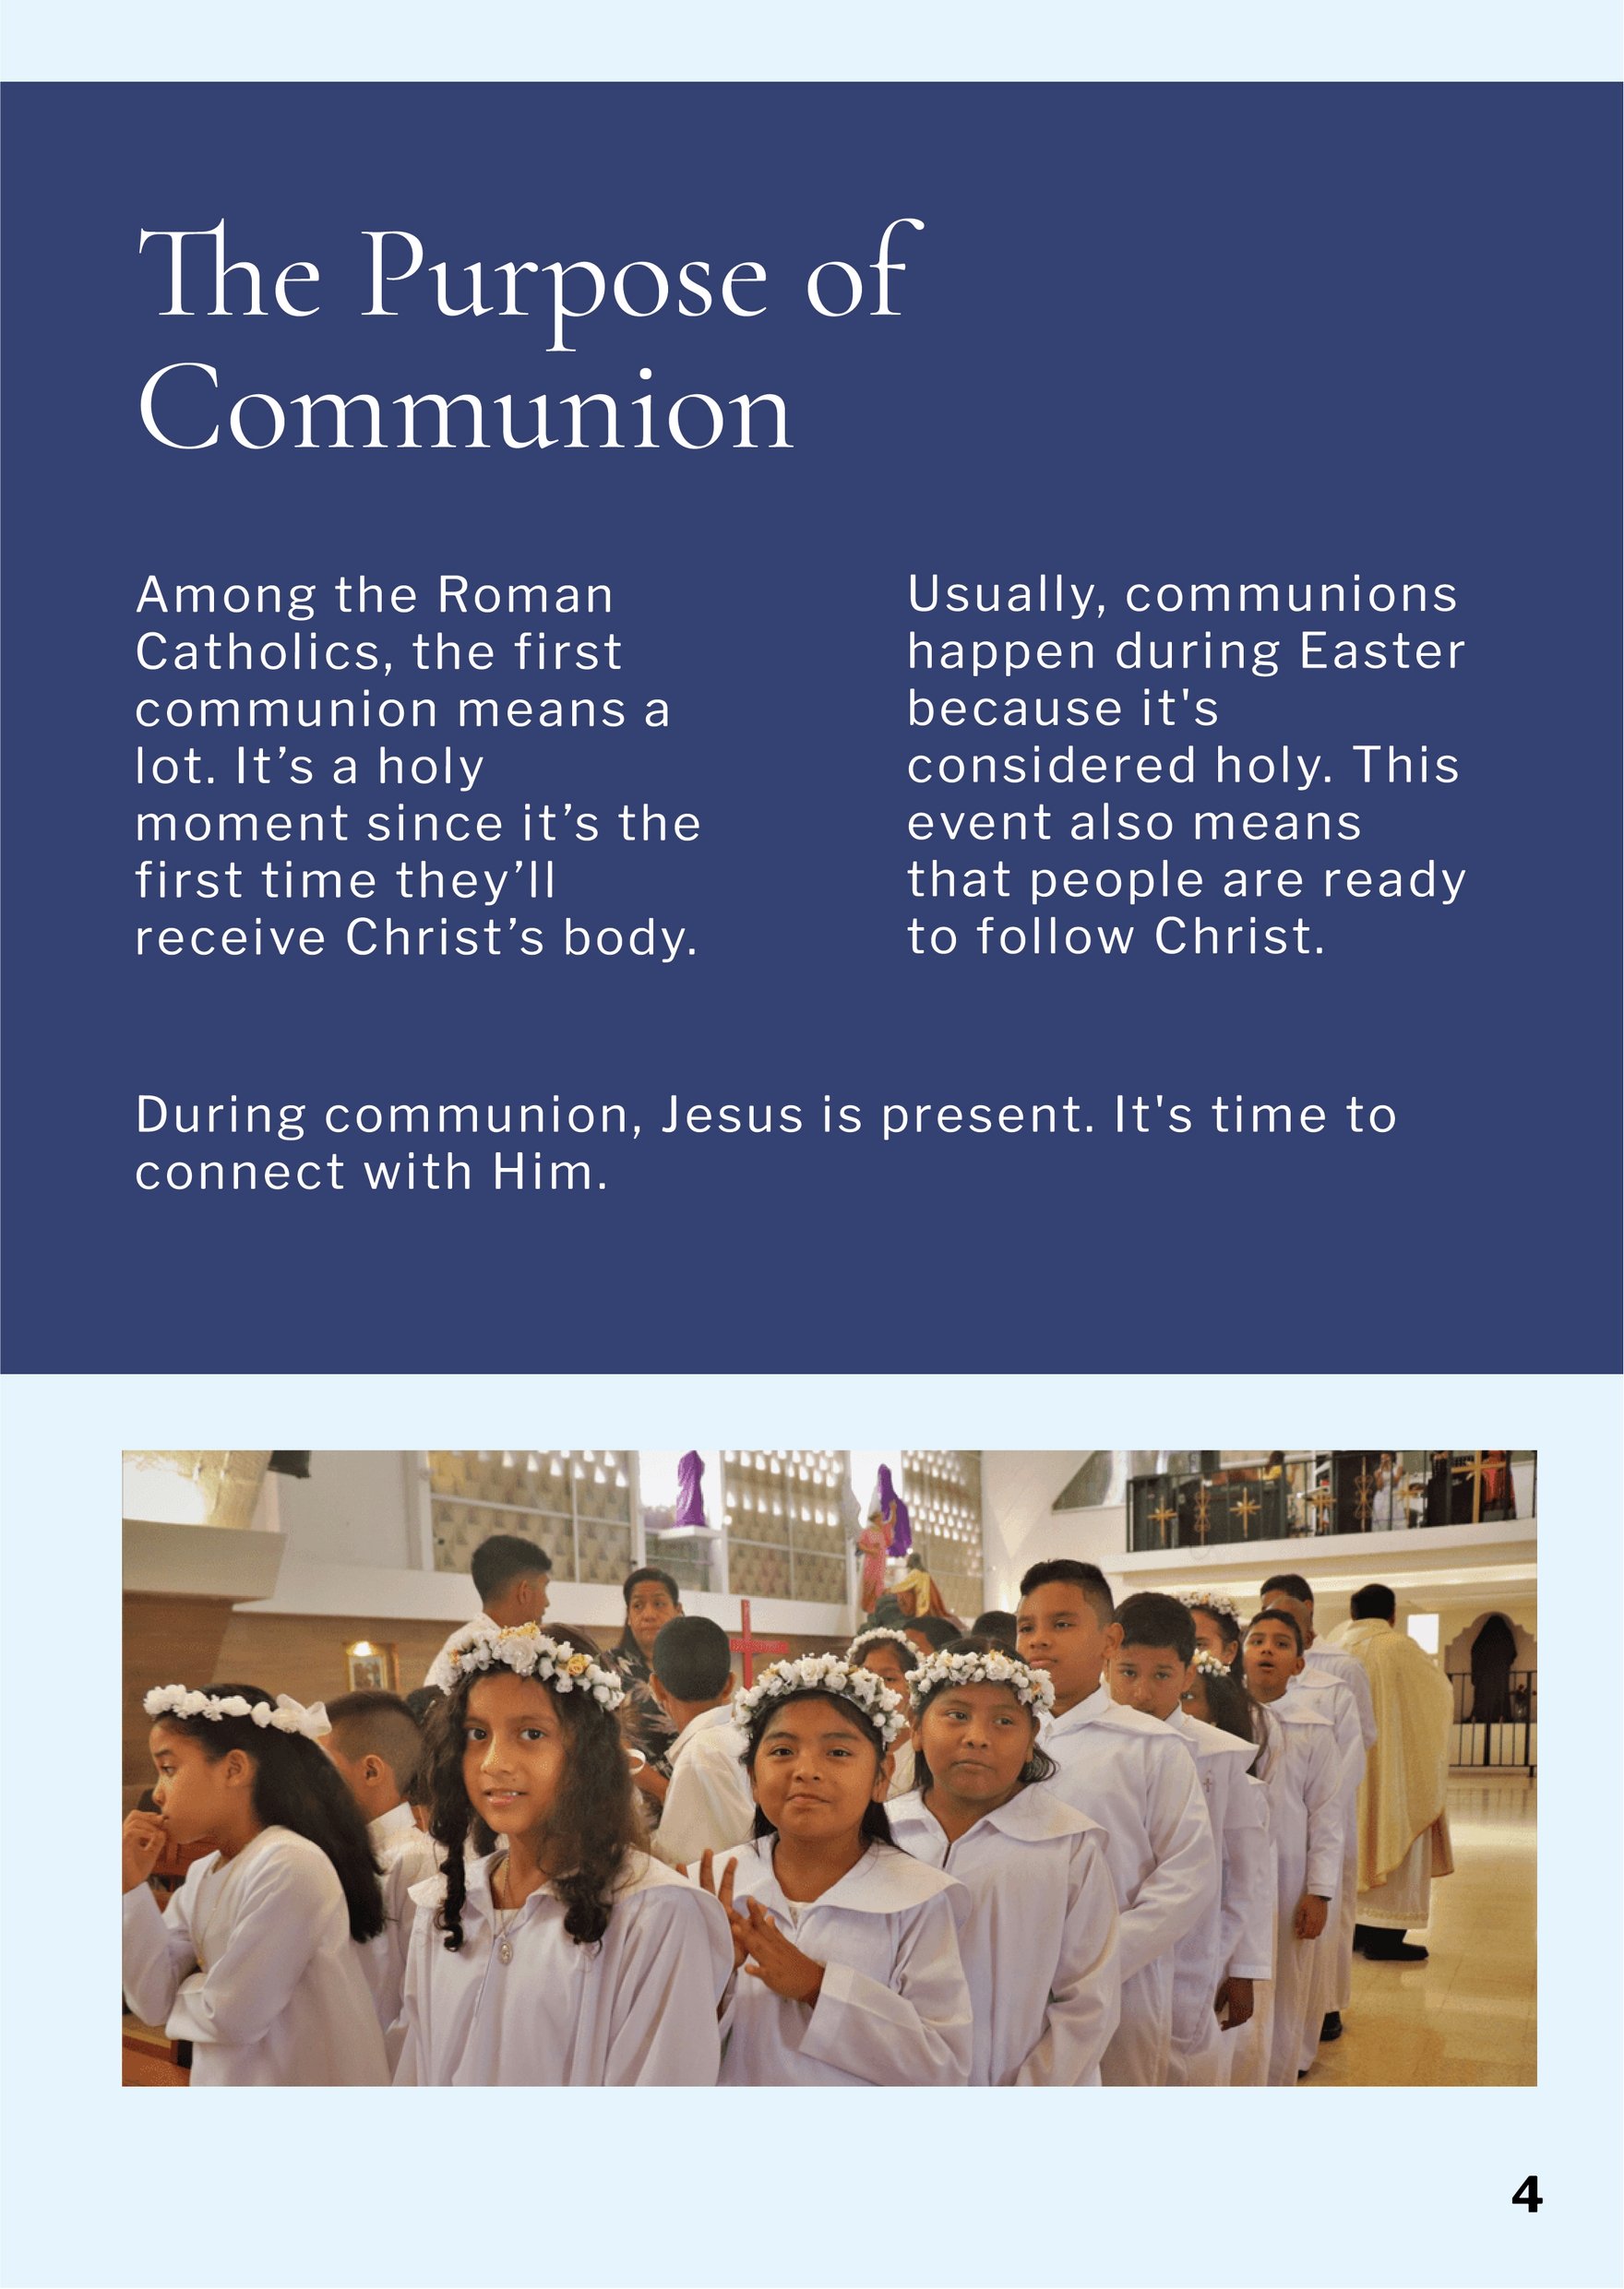 First Communion Booklet Template